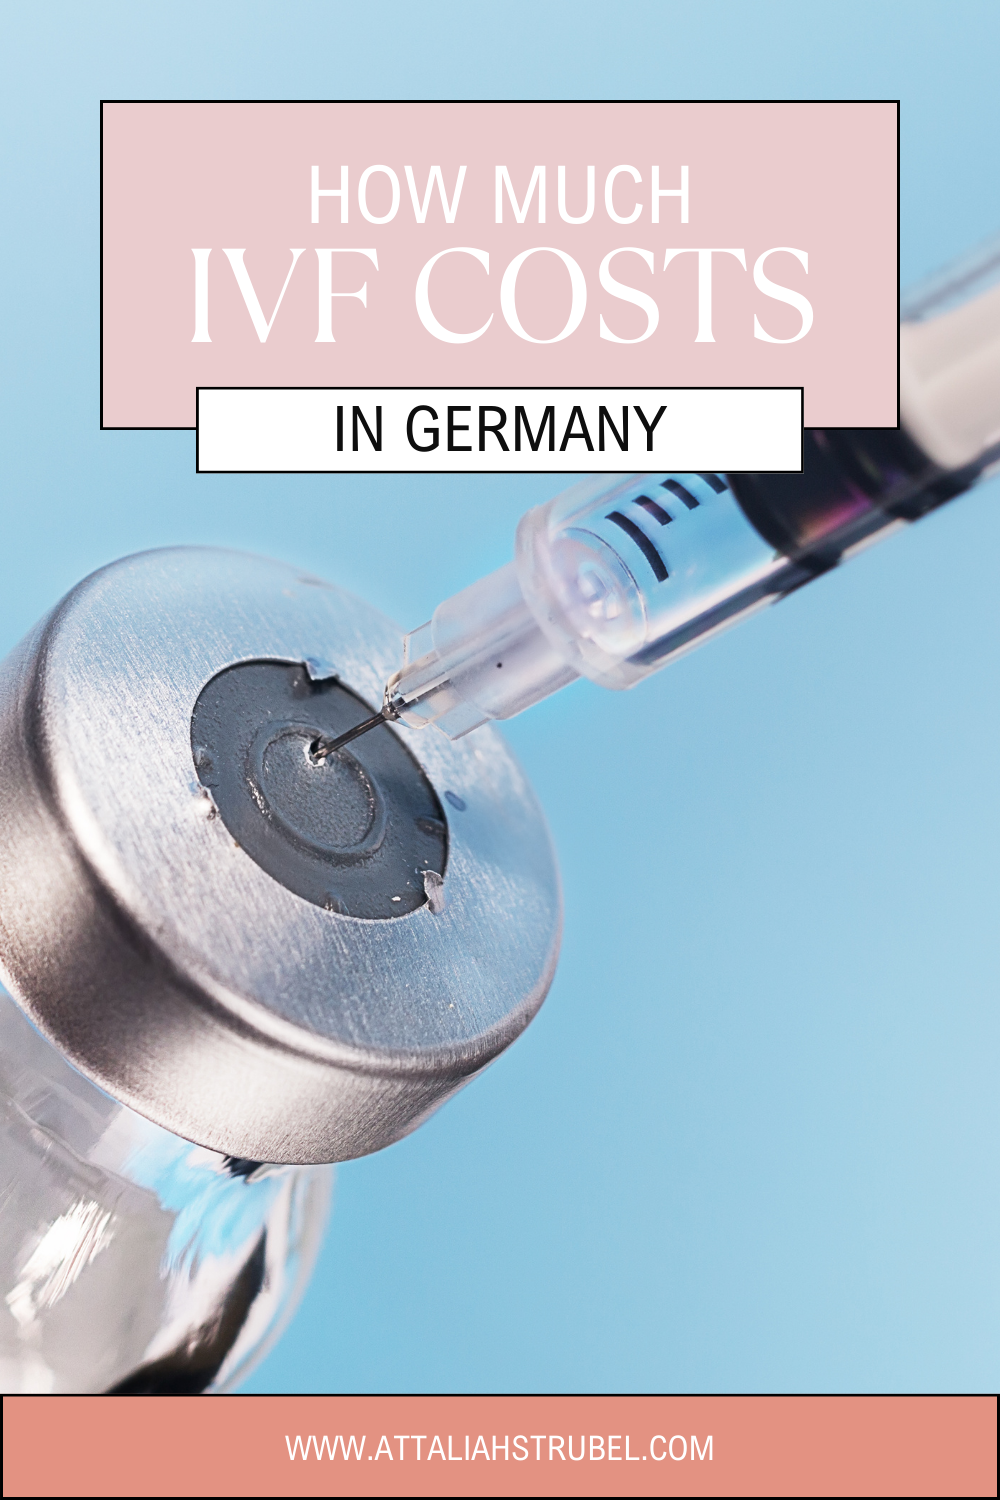 How Much IVF Costs in Germany